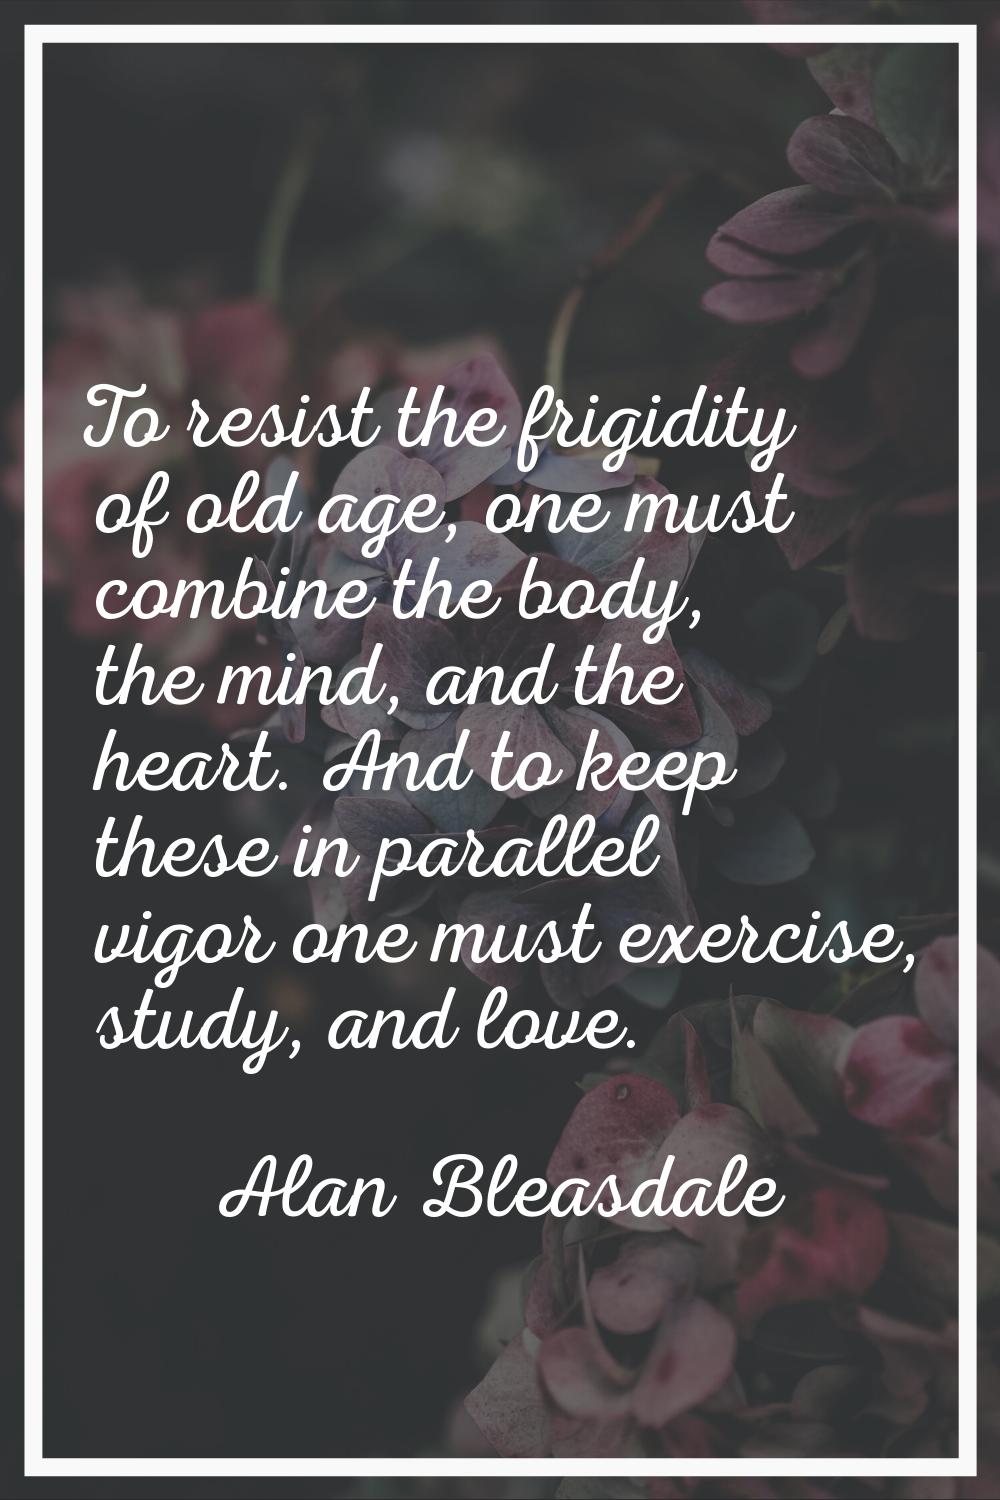 To resist the frigidity of old age, one must combine the body, the mind, and the heart. And to keep